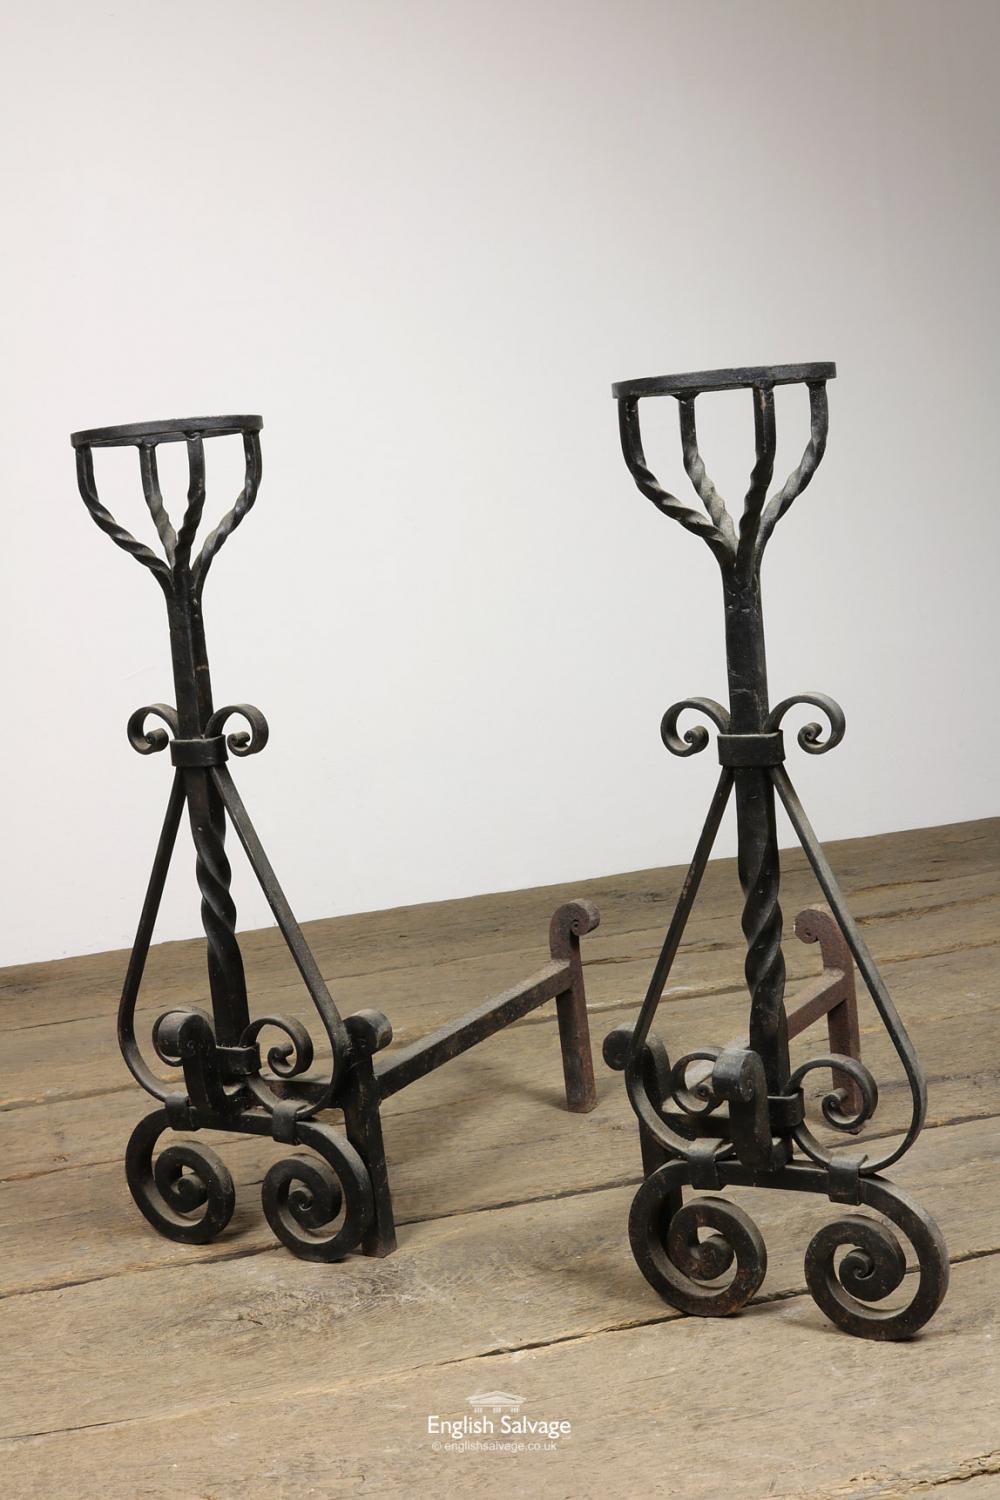 European Salvaged Barley Twist Wrought Fire Dogs, 20th Century For Sale